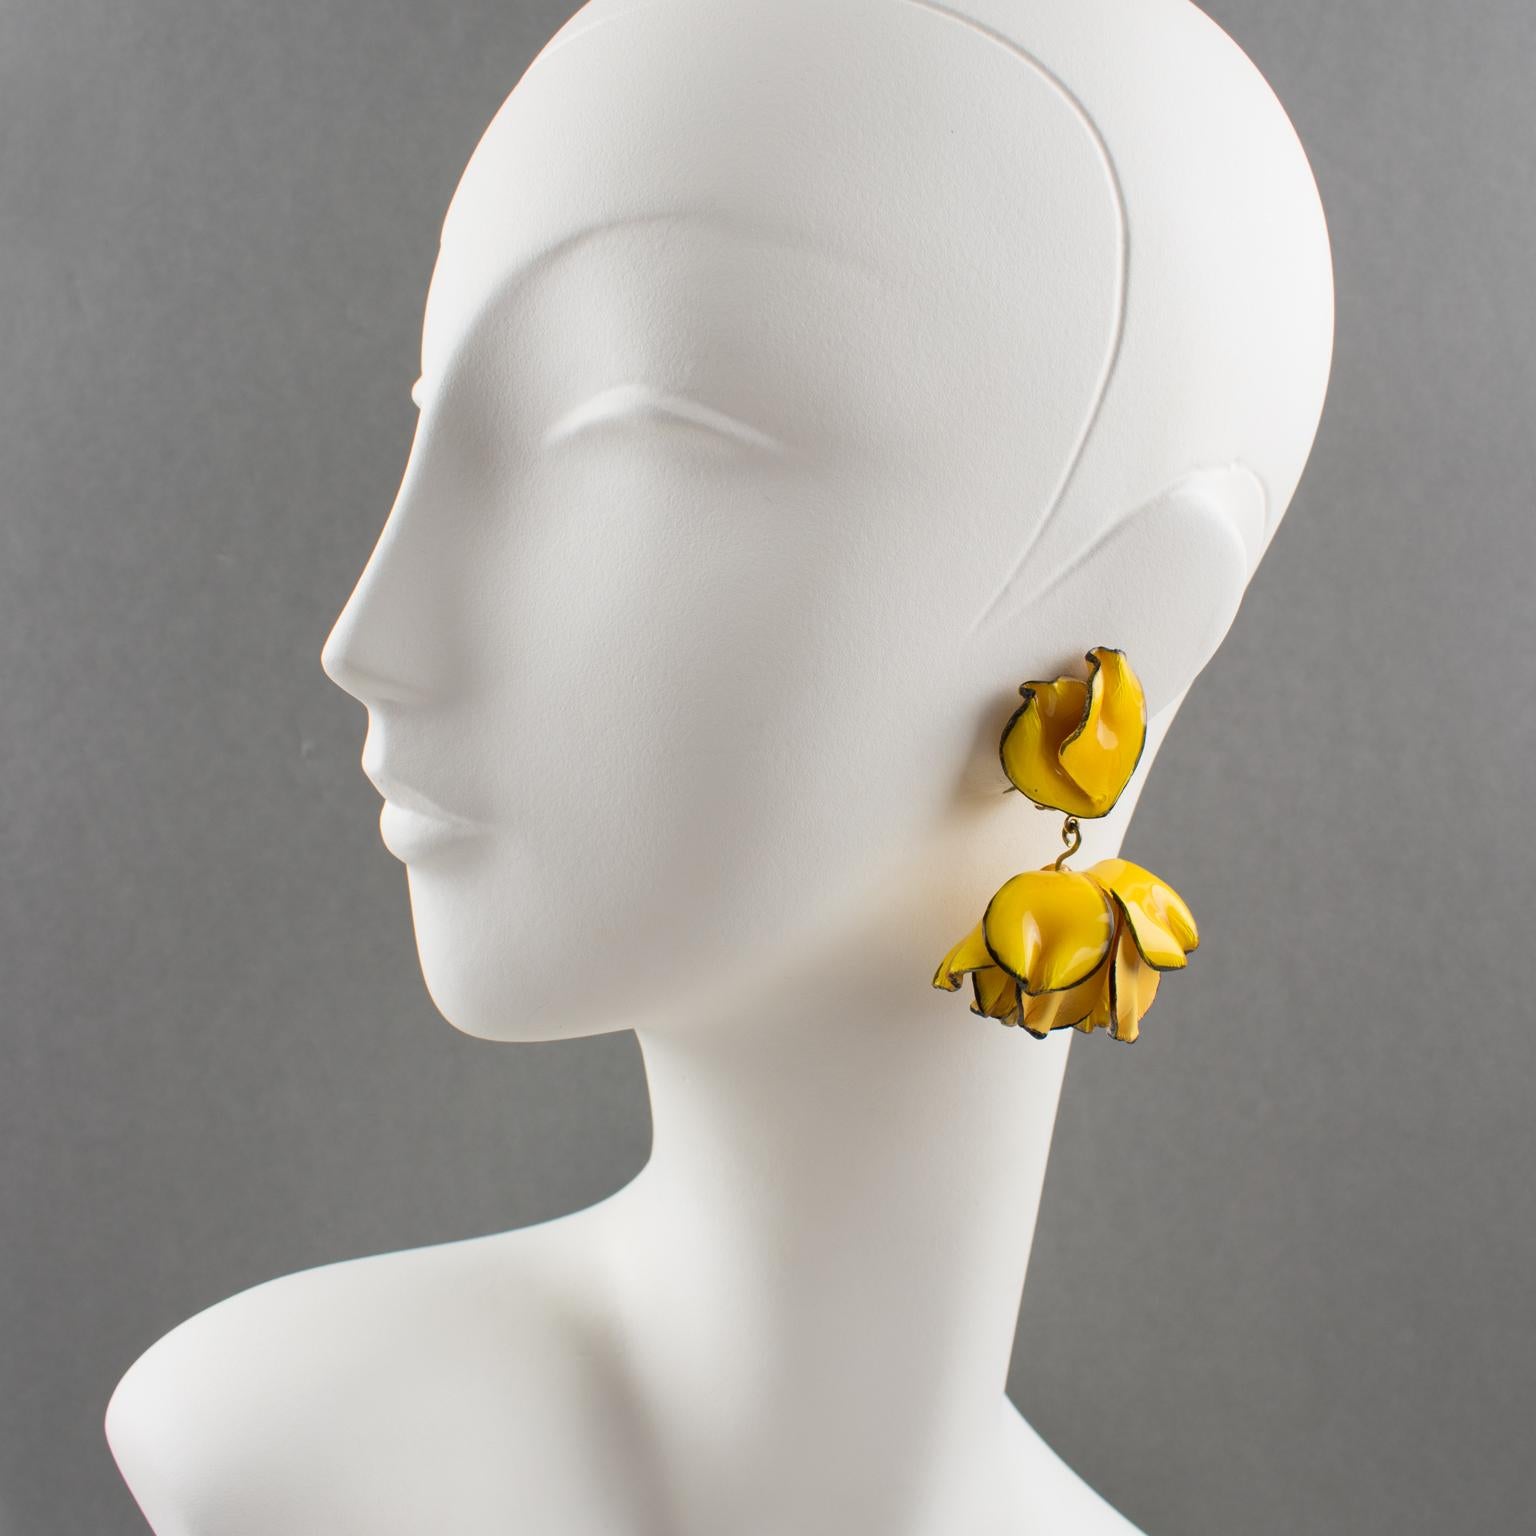 Charming dimensional dangling clip-on earrings by Cilea Paris. Floral inspired hand-made artisanal resin or Talosel earrings featuring poppy flower with textured pattern build together to form a powerful statement piece. Very nice vivid yellow egg